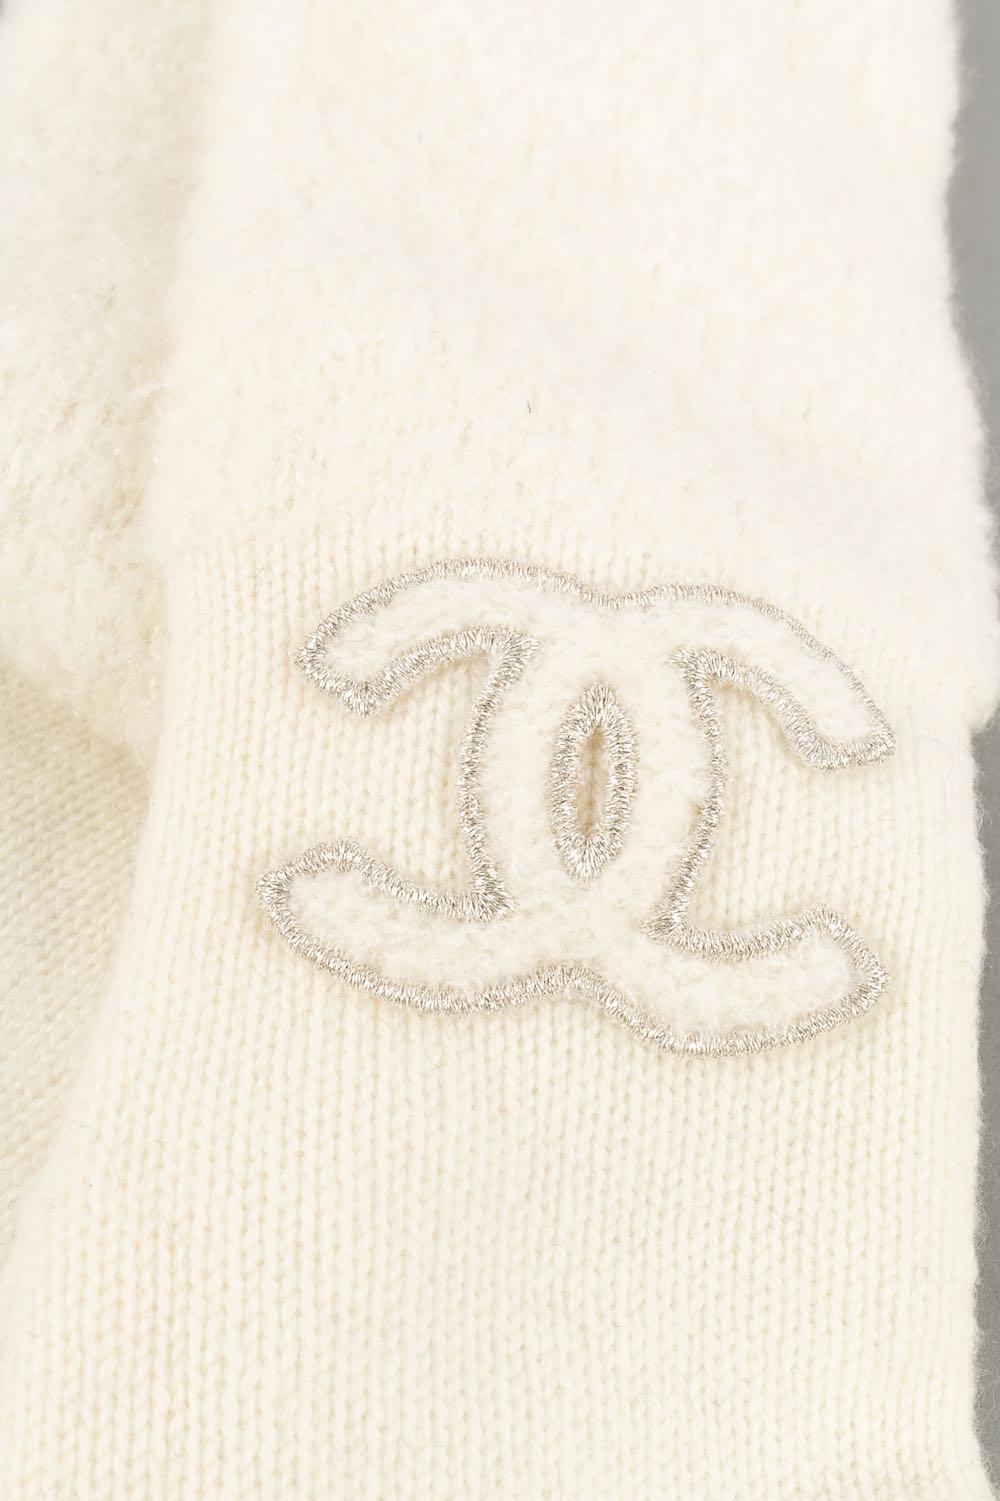 Chanel - (Made in Italy) White wool gloves.

Additional information:
Condition: Very good condition
Dimensions: Height: 41 cm

Seller Reference: ACC102